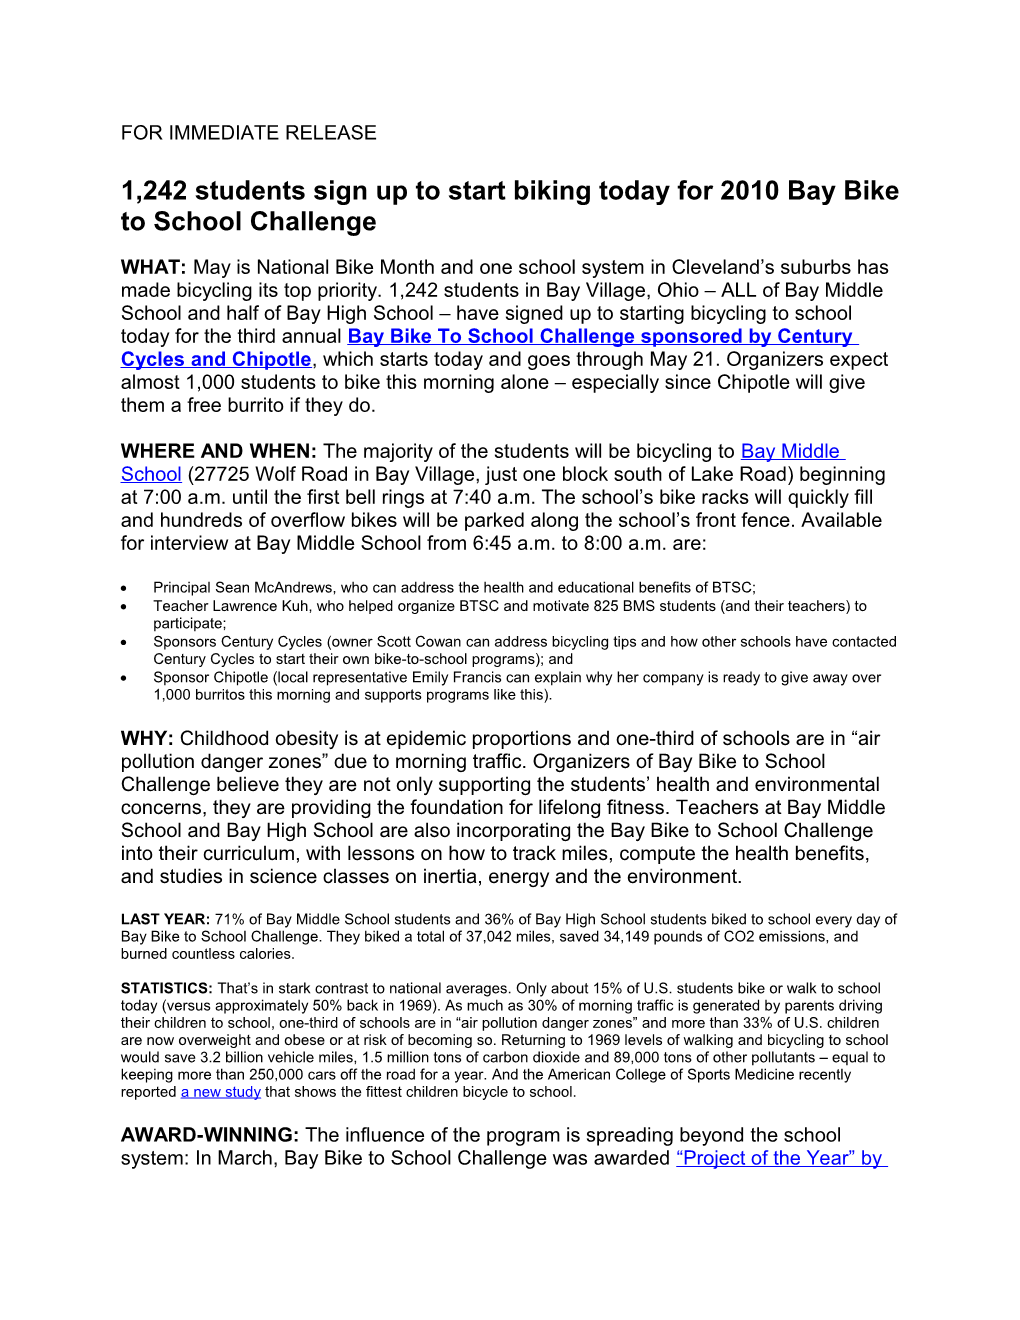 1,242 Students Sign up to Start Biking Today for 2010 Bay Bike to School Challenge